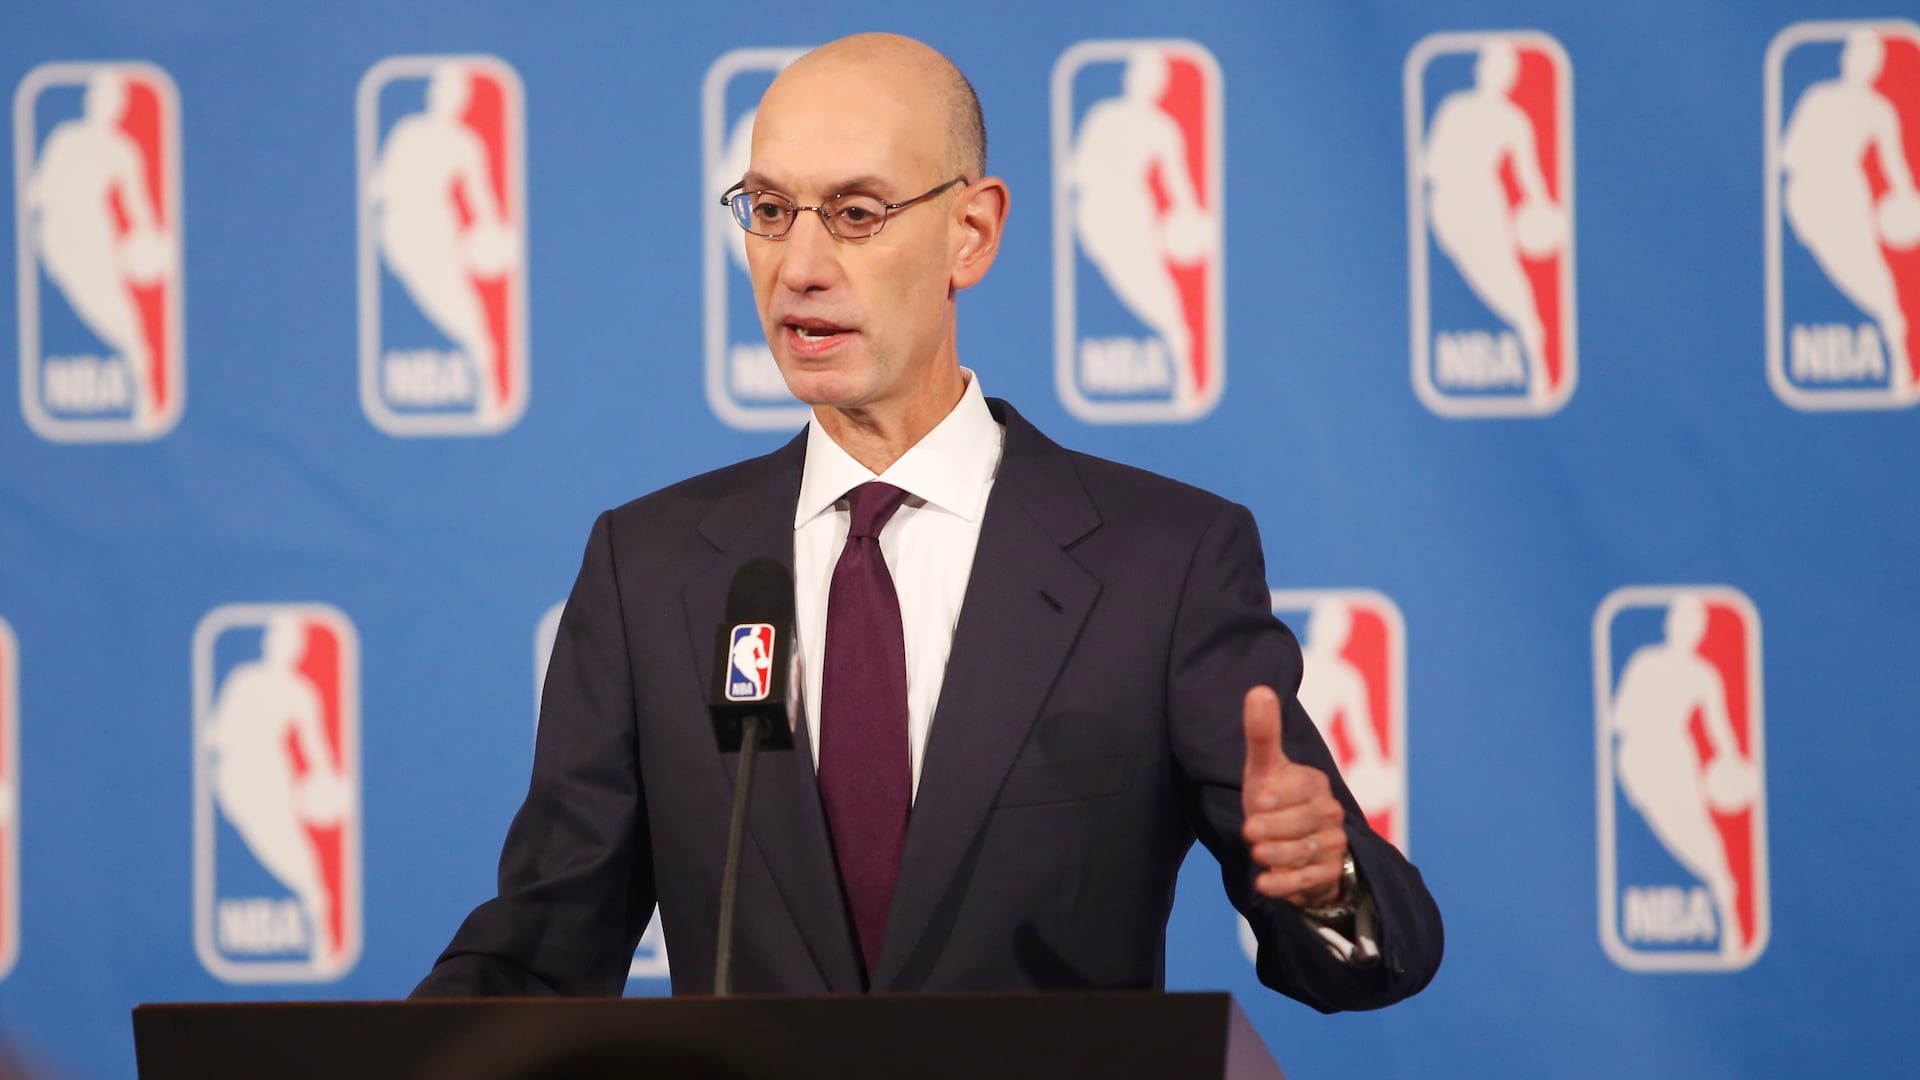 NBA, NBPA In ‘Serious Talks’ on Changing Draft Age Requirement